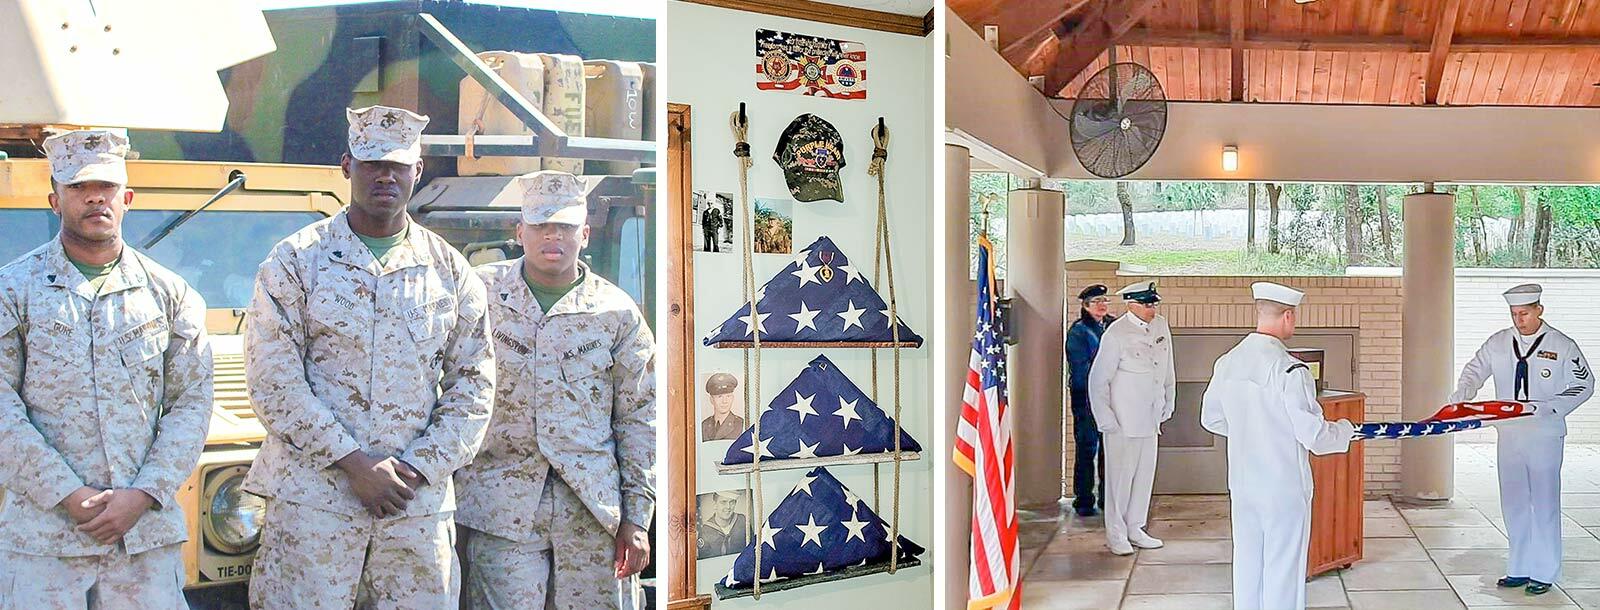 Photos of Demetrius Wood in the Marines with other officers, folded flags on a wall, and a flag folding ceremony